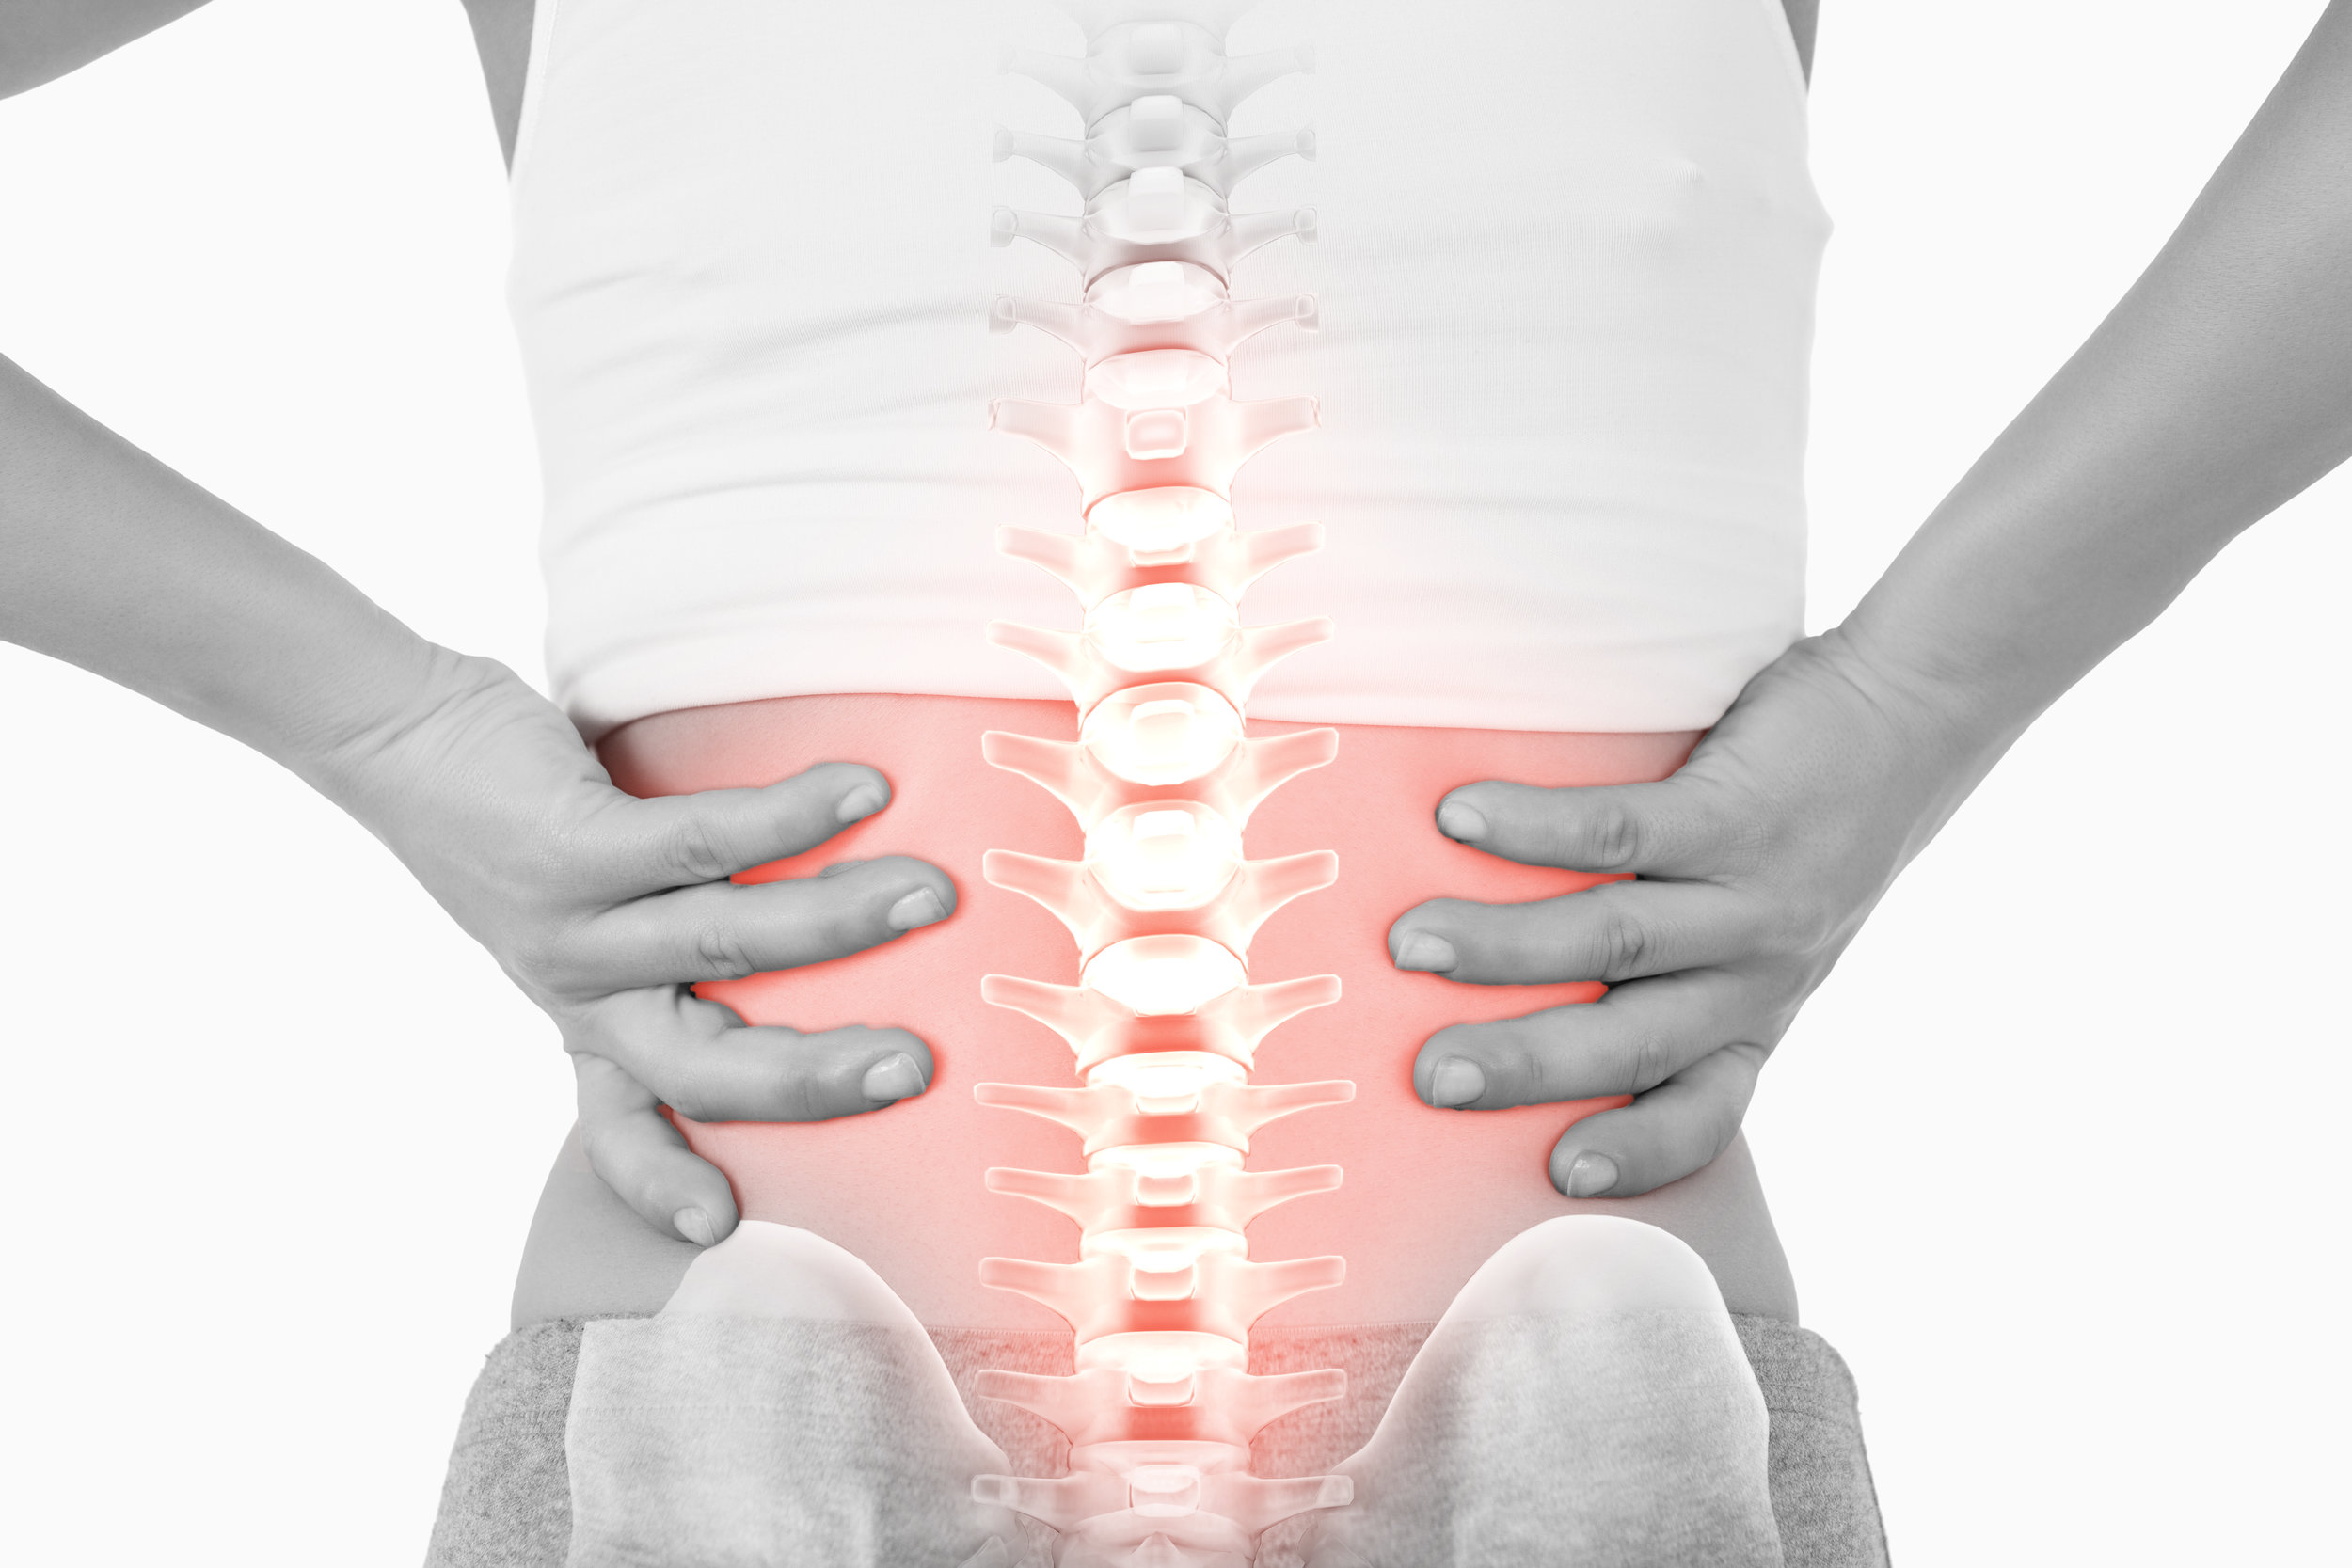 photodune-11504273-digital-composite-of-highlighted-spine-of-woman-with-back-pain-xxl.jpg